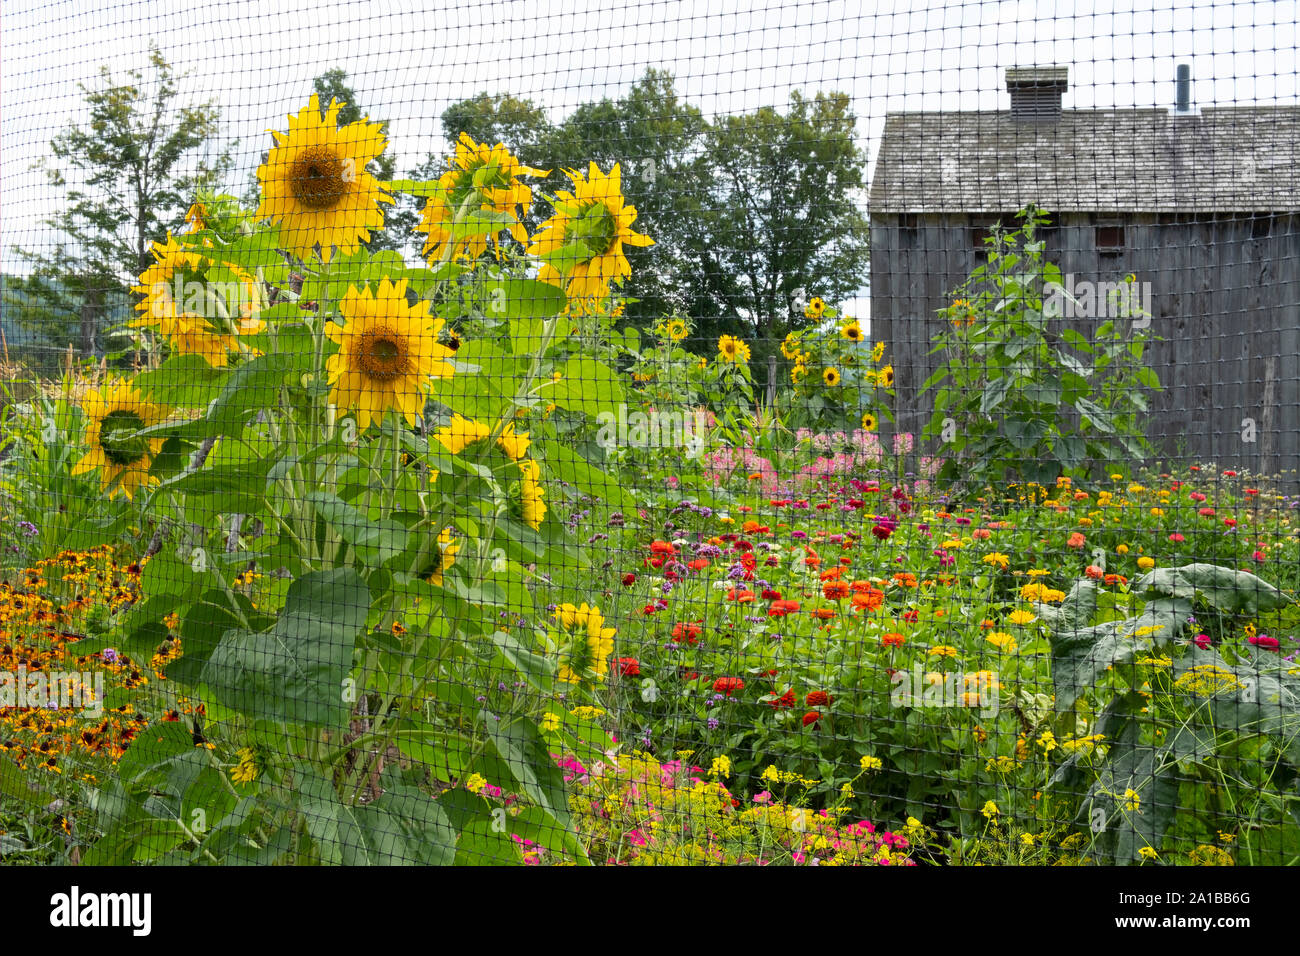 A flower filled garden at the Farmers’ Museum in Cooperstown, New York State, U.S.A. Stock Photo